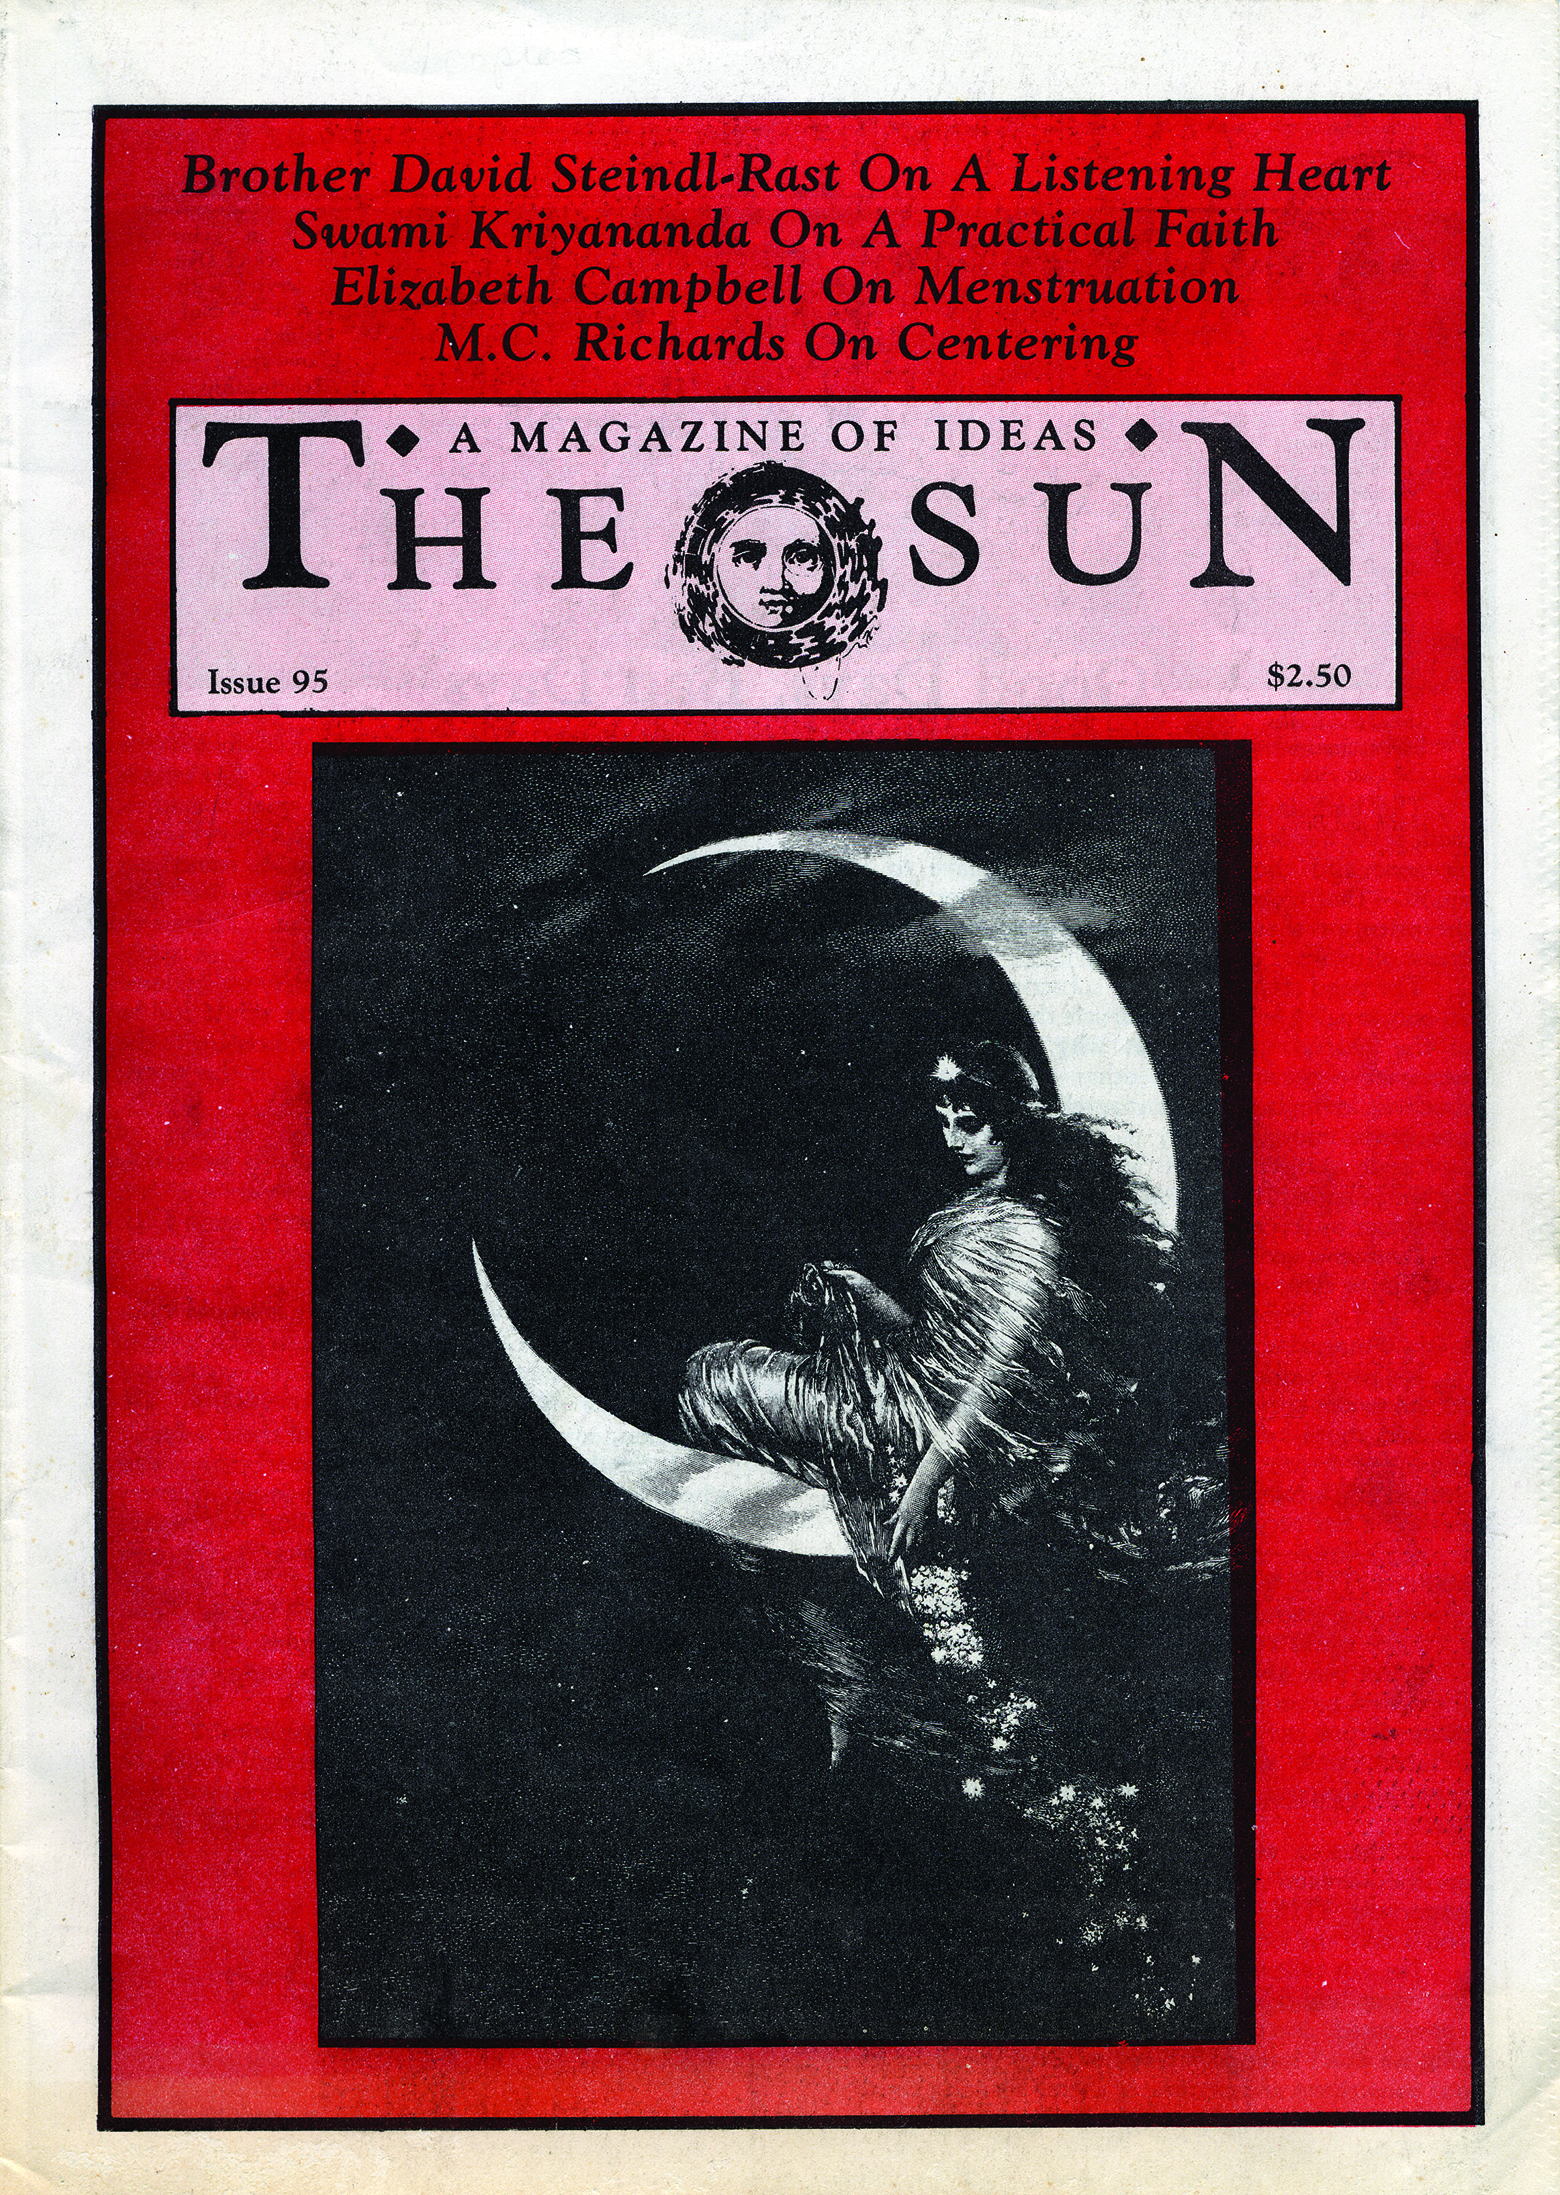 October 1983 cover of The Sun. An image of a woman in drapey garb sitting in a crescent moon.